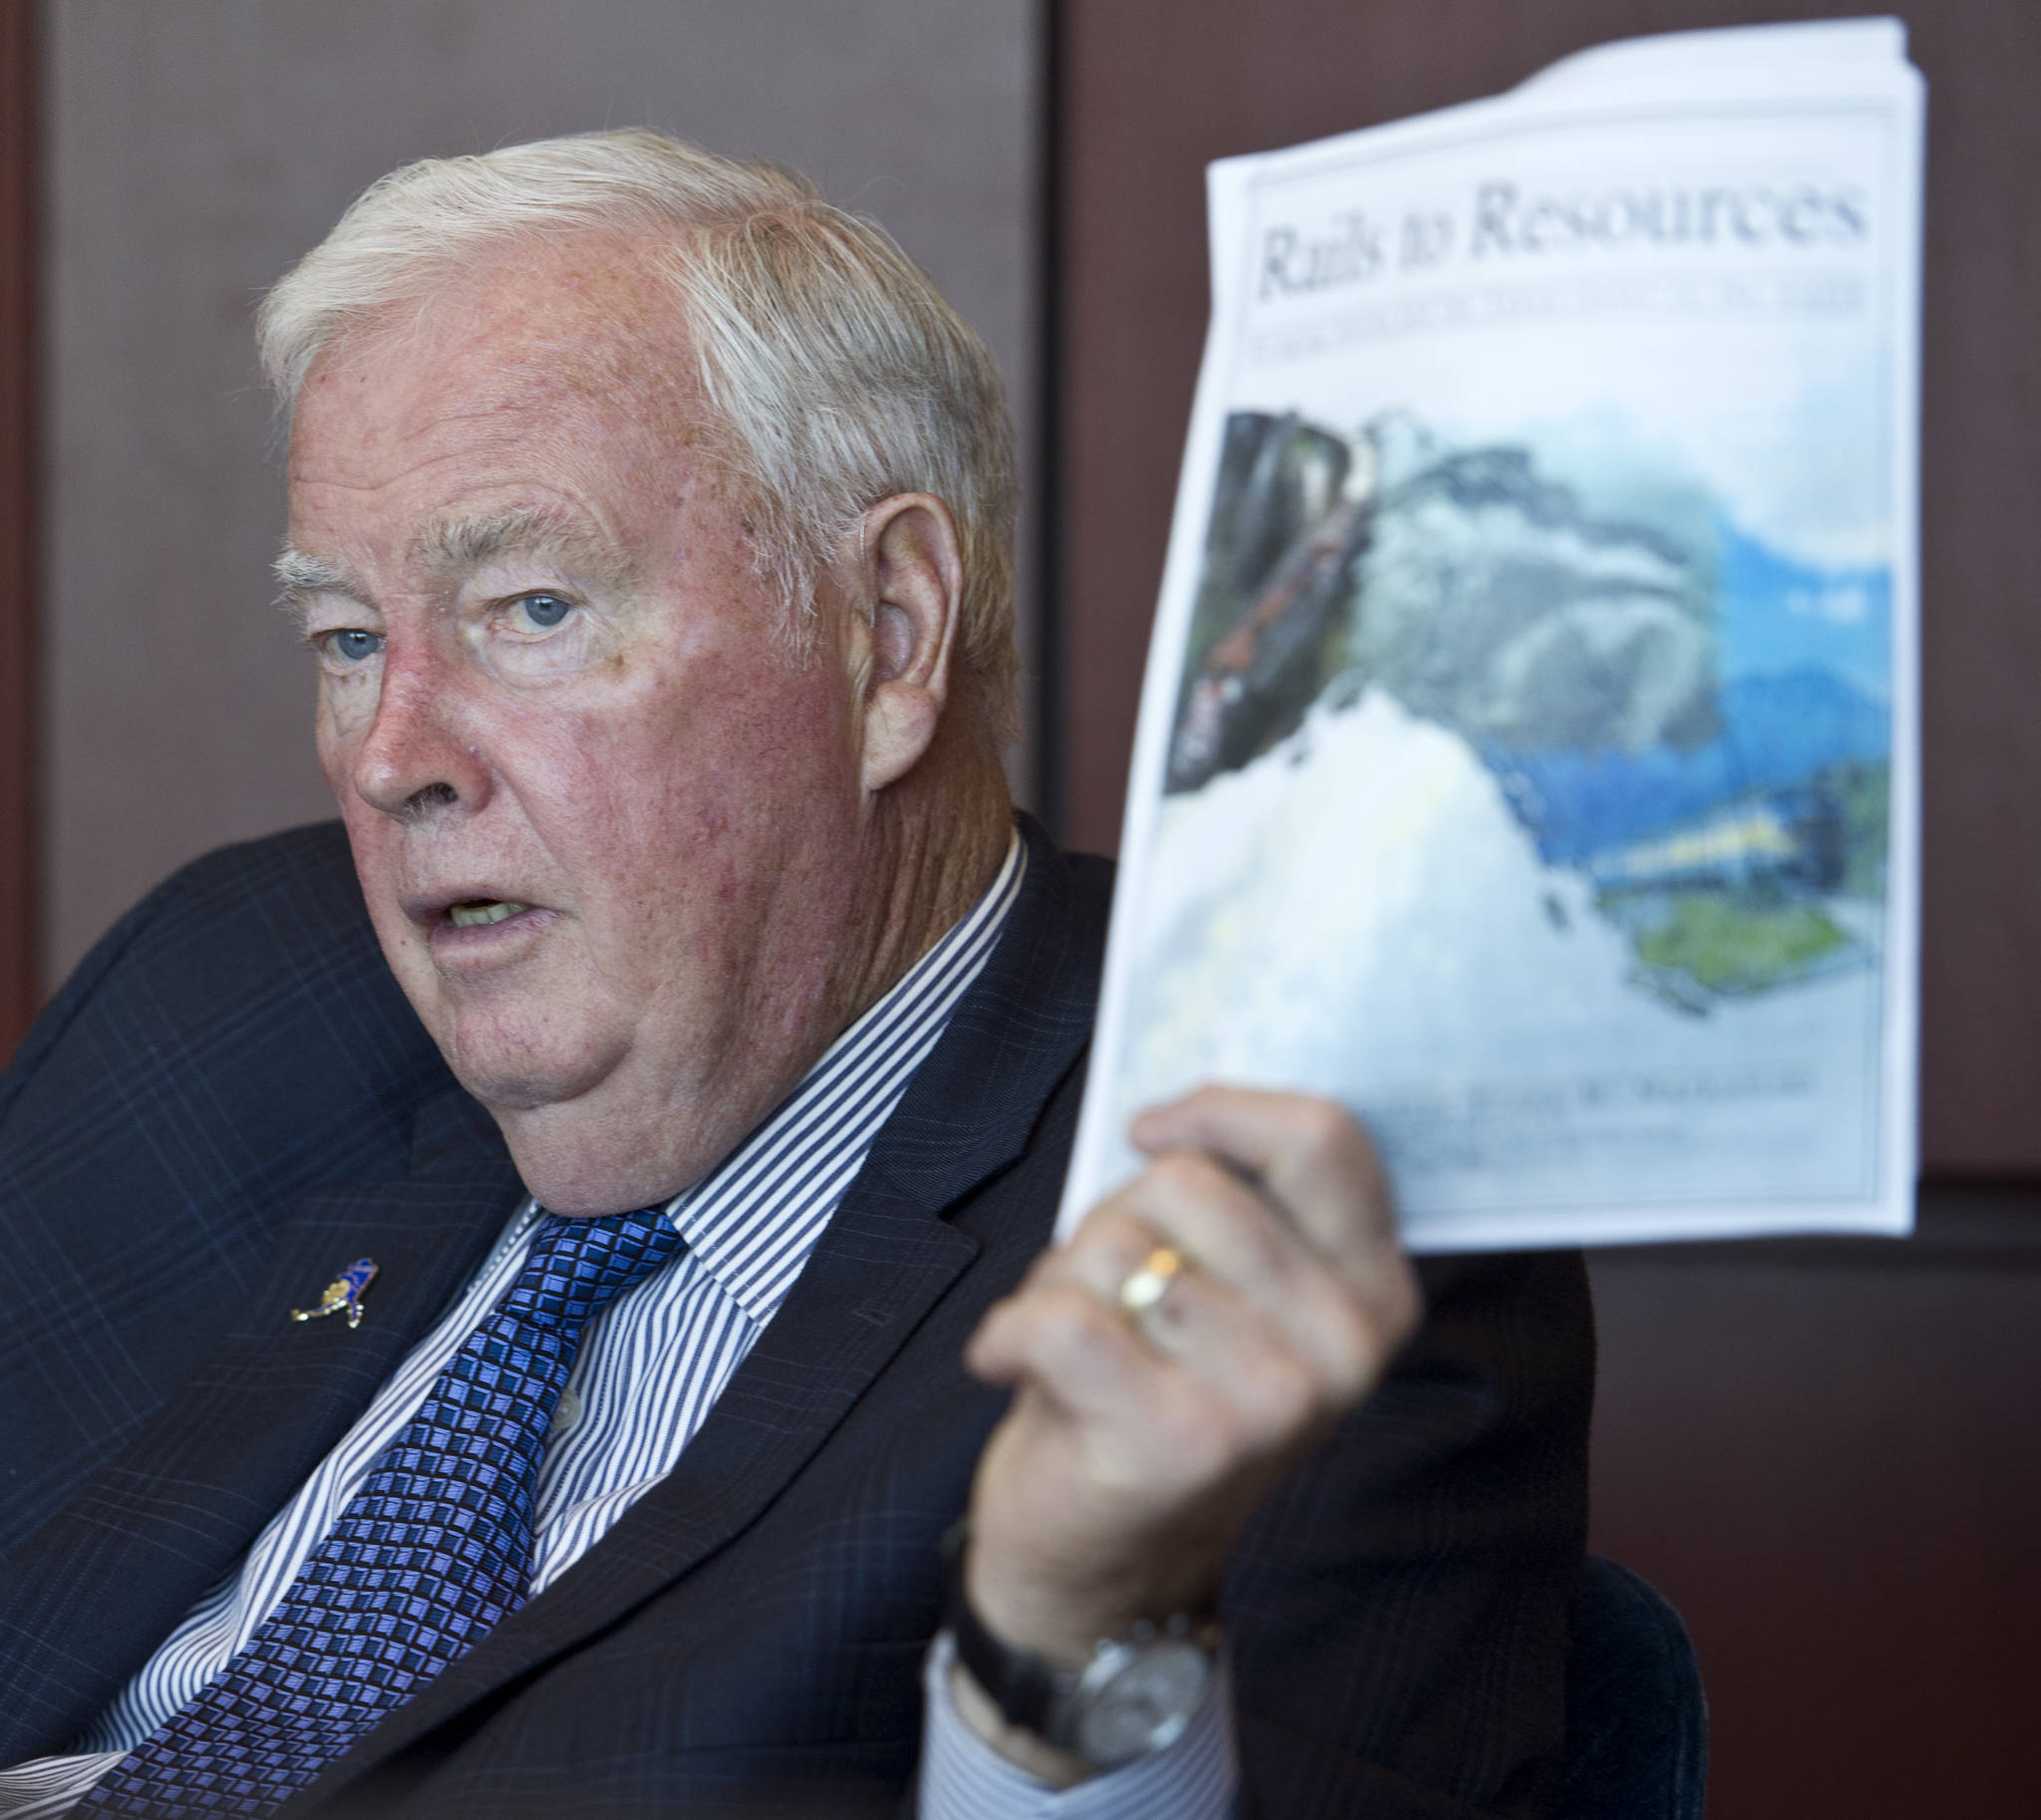 Former Alaska Gov. Frank Murkowski is traveling the state at the request of current Gov. Bill Walker to promote a railway connecting Alaska to Canadian rails. Murkowski is holding a Rails to Resources informational packet his office produced in June 2000 when he was a U.S. Senator for Alaska. (Michael Penn | Juneau Empire)